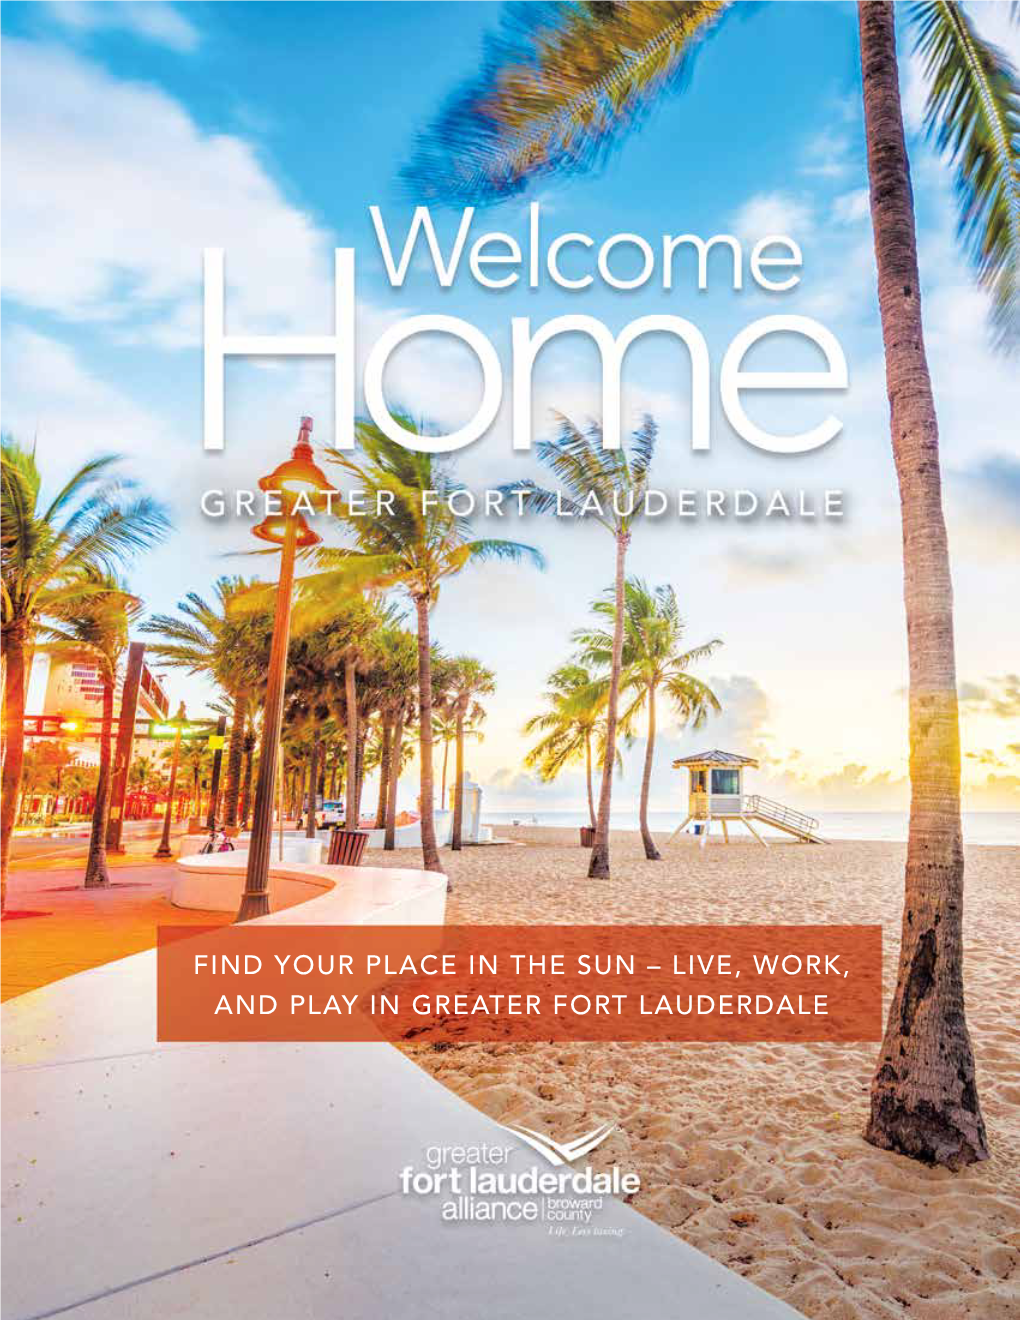 Live, Work, and Play in Greater Fort Lauderdale